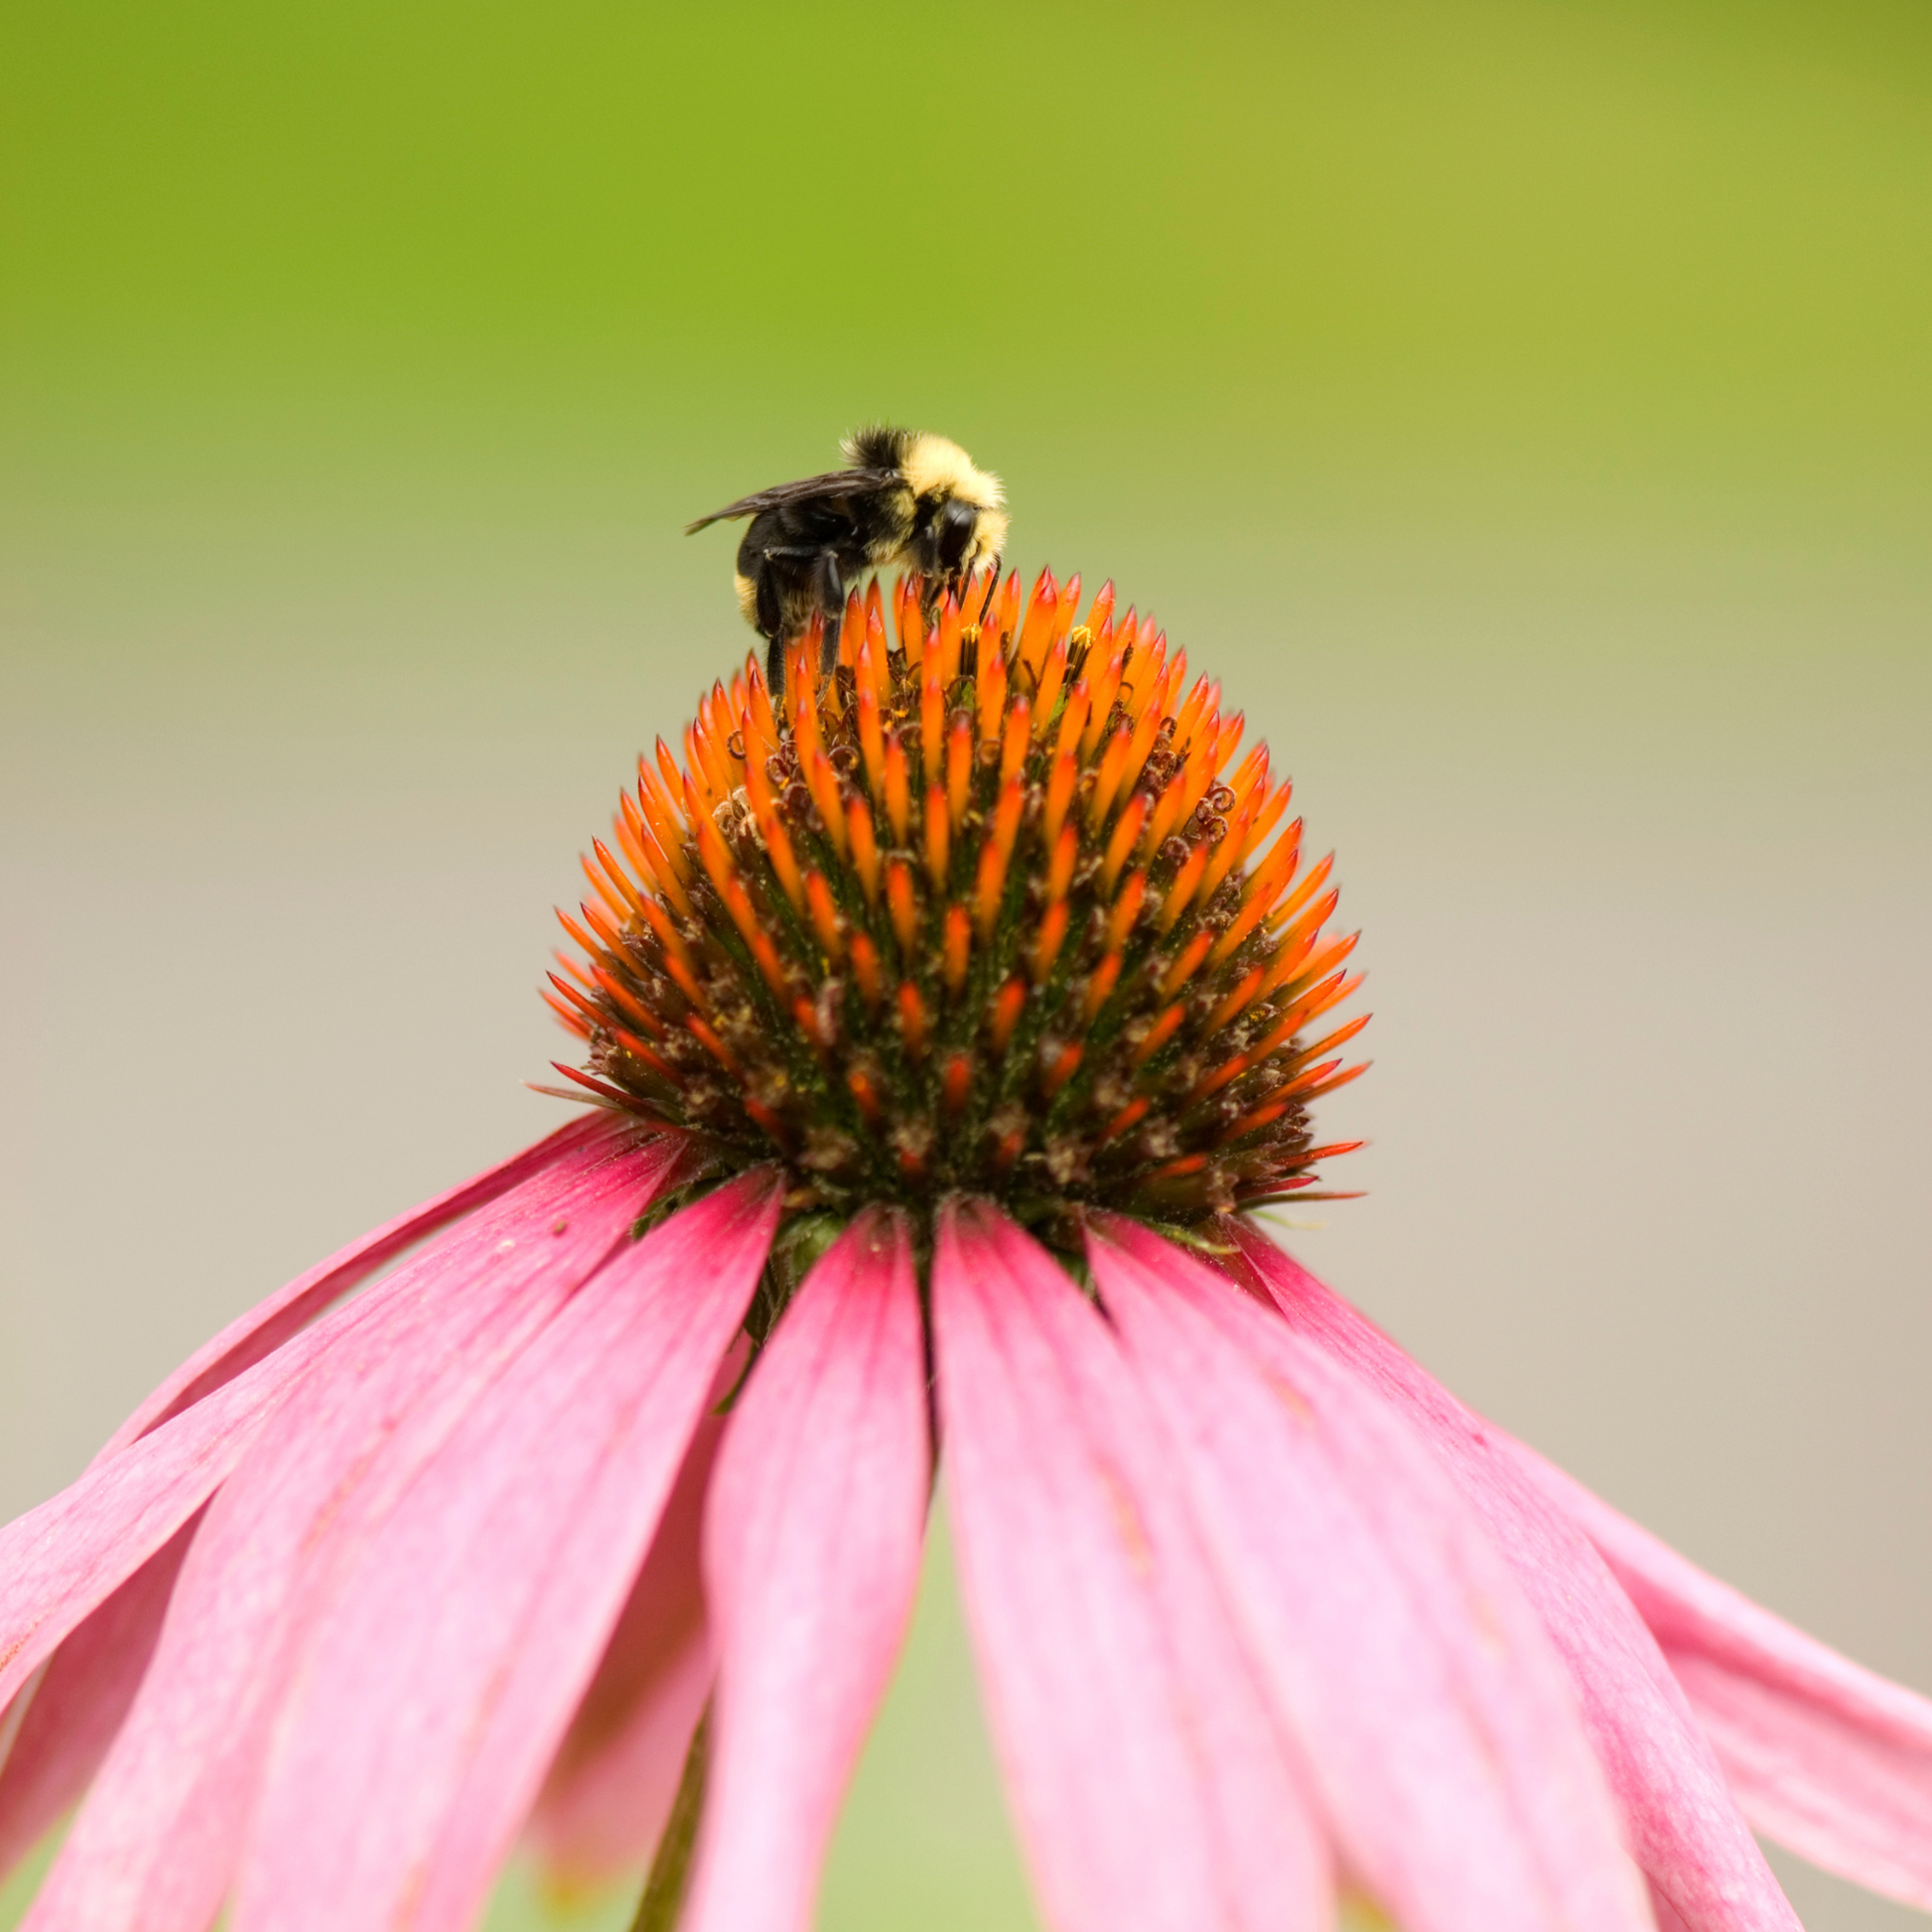 A bee perched on a vibrant pink flower, symbolizing the goal of the Pollinator Power Vault Seeds